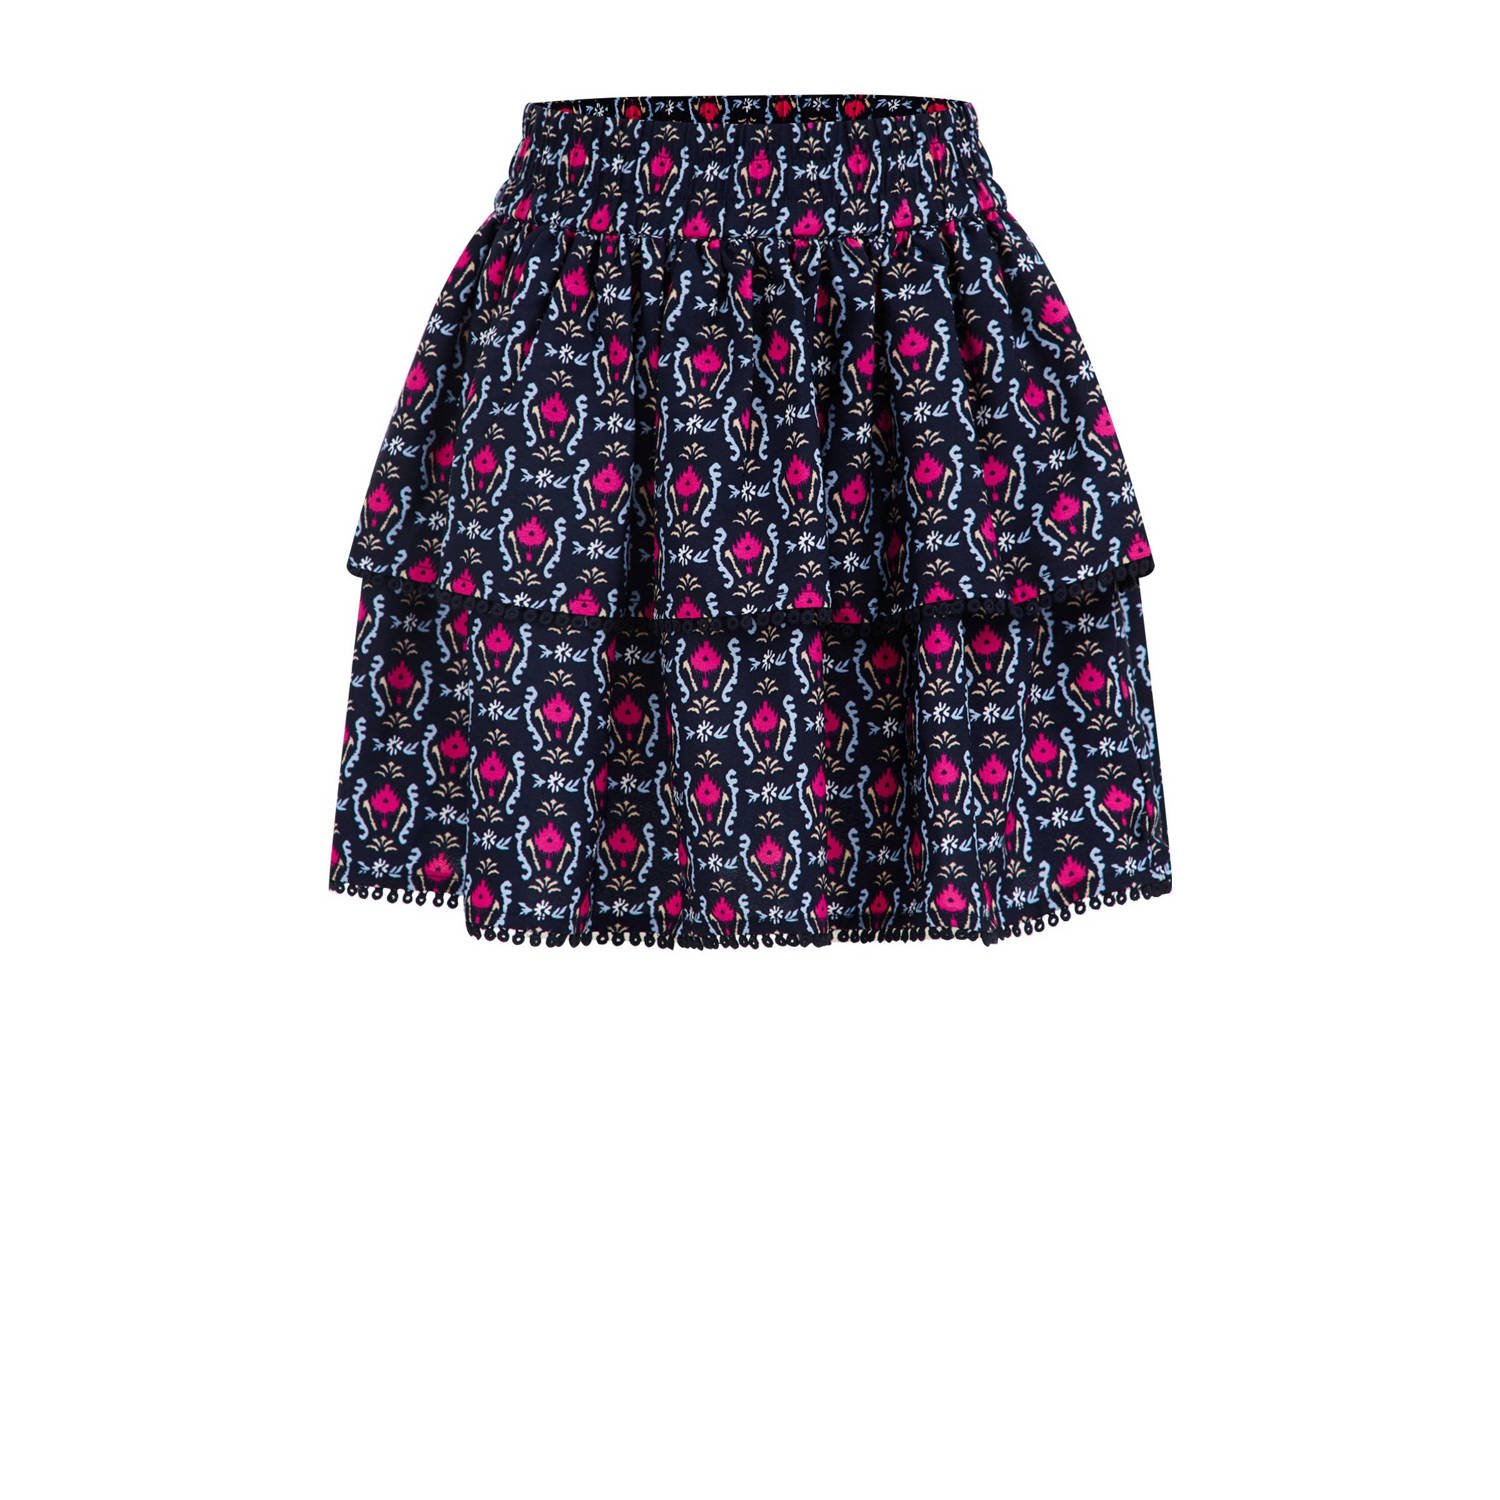 WE Fashion rok met all over print en volant donkerblauw roze lichtblauw Multi Meisjes Gerecycled polyester 110 116